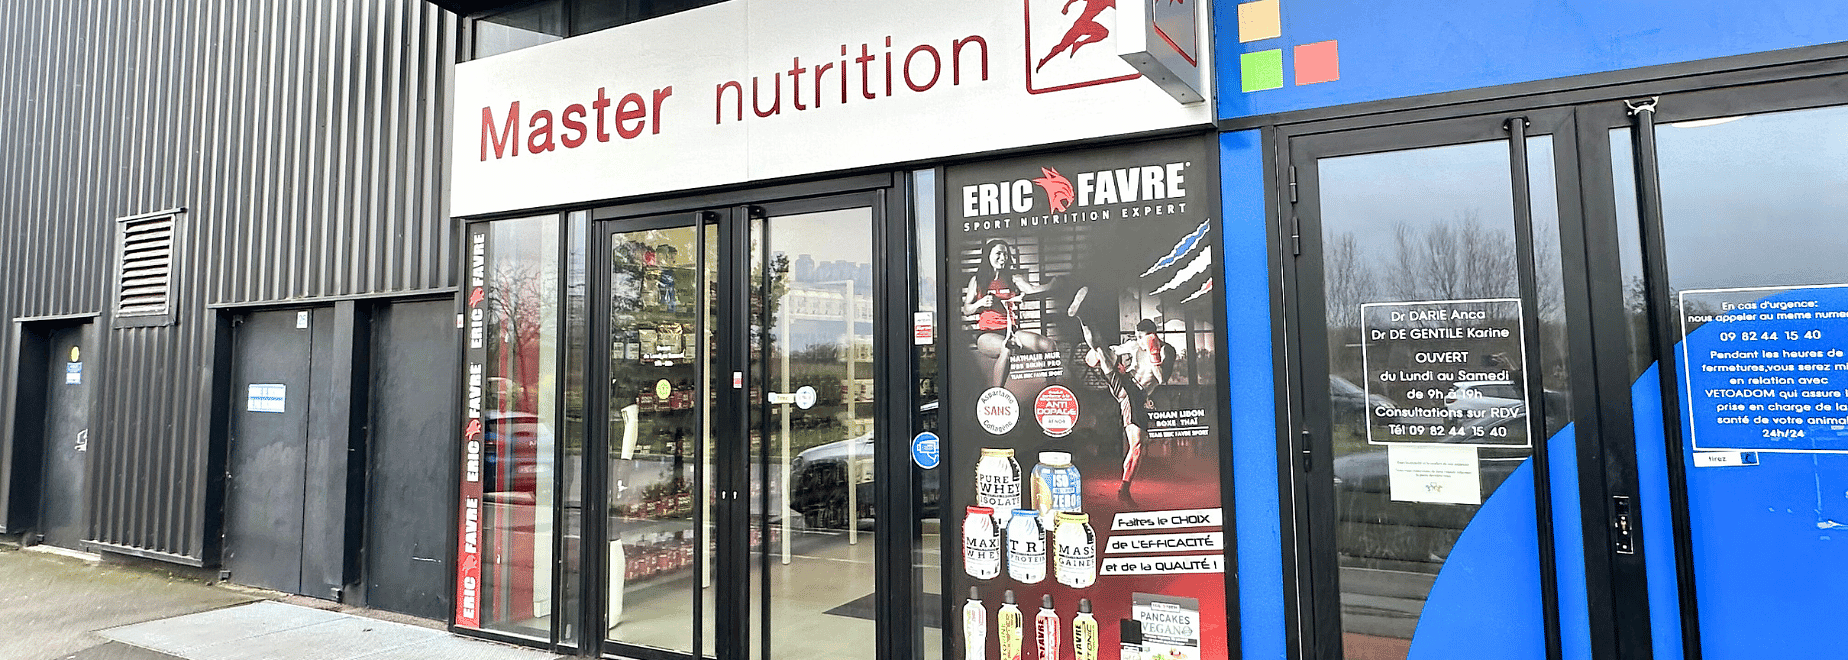 Master Nutrition, équipement sportif, nutrition, proteines, whey, BCAA, Créatine